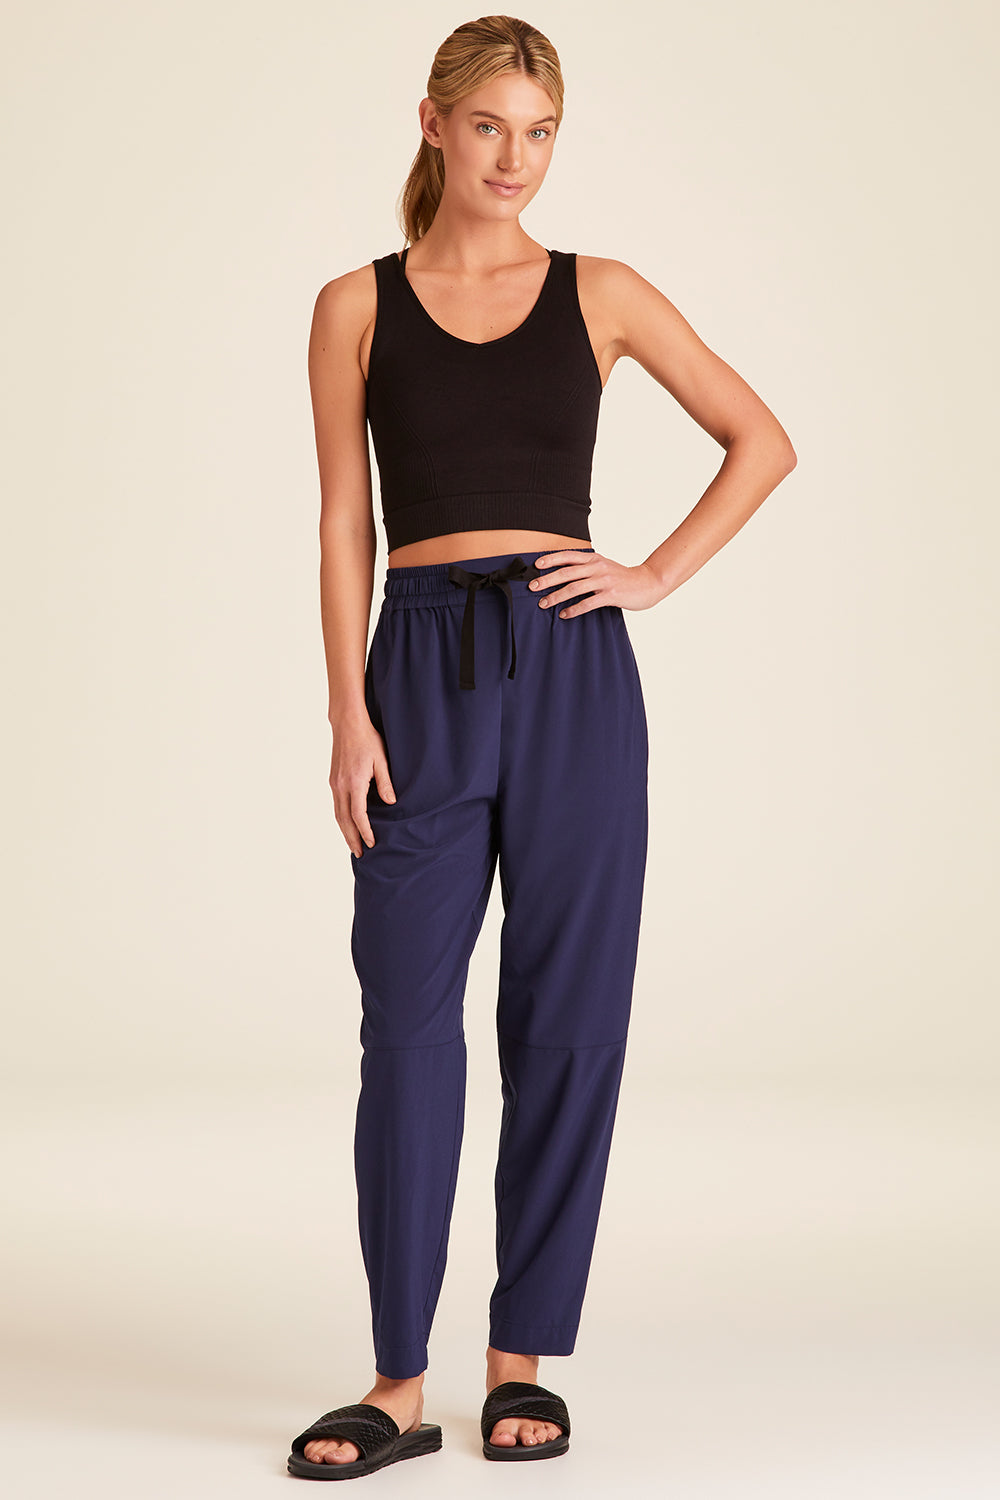 Full body front view of Alala Luxury Women's Athleisure commuter pant in navy